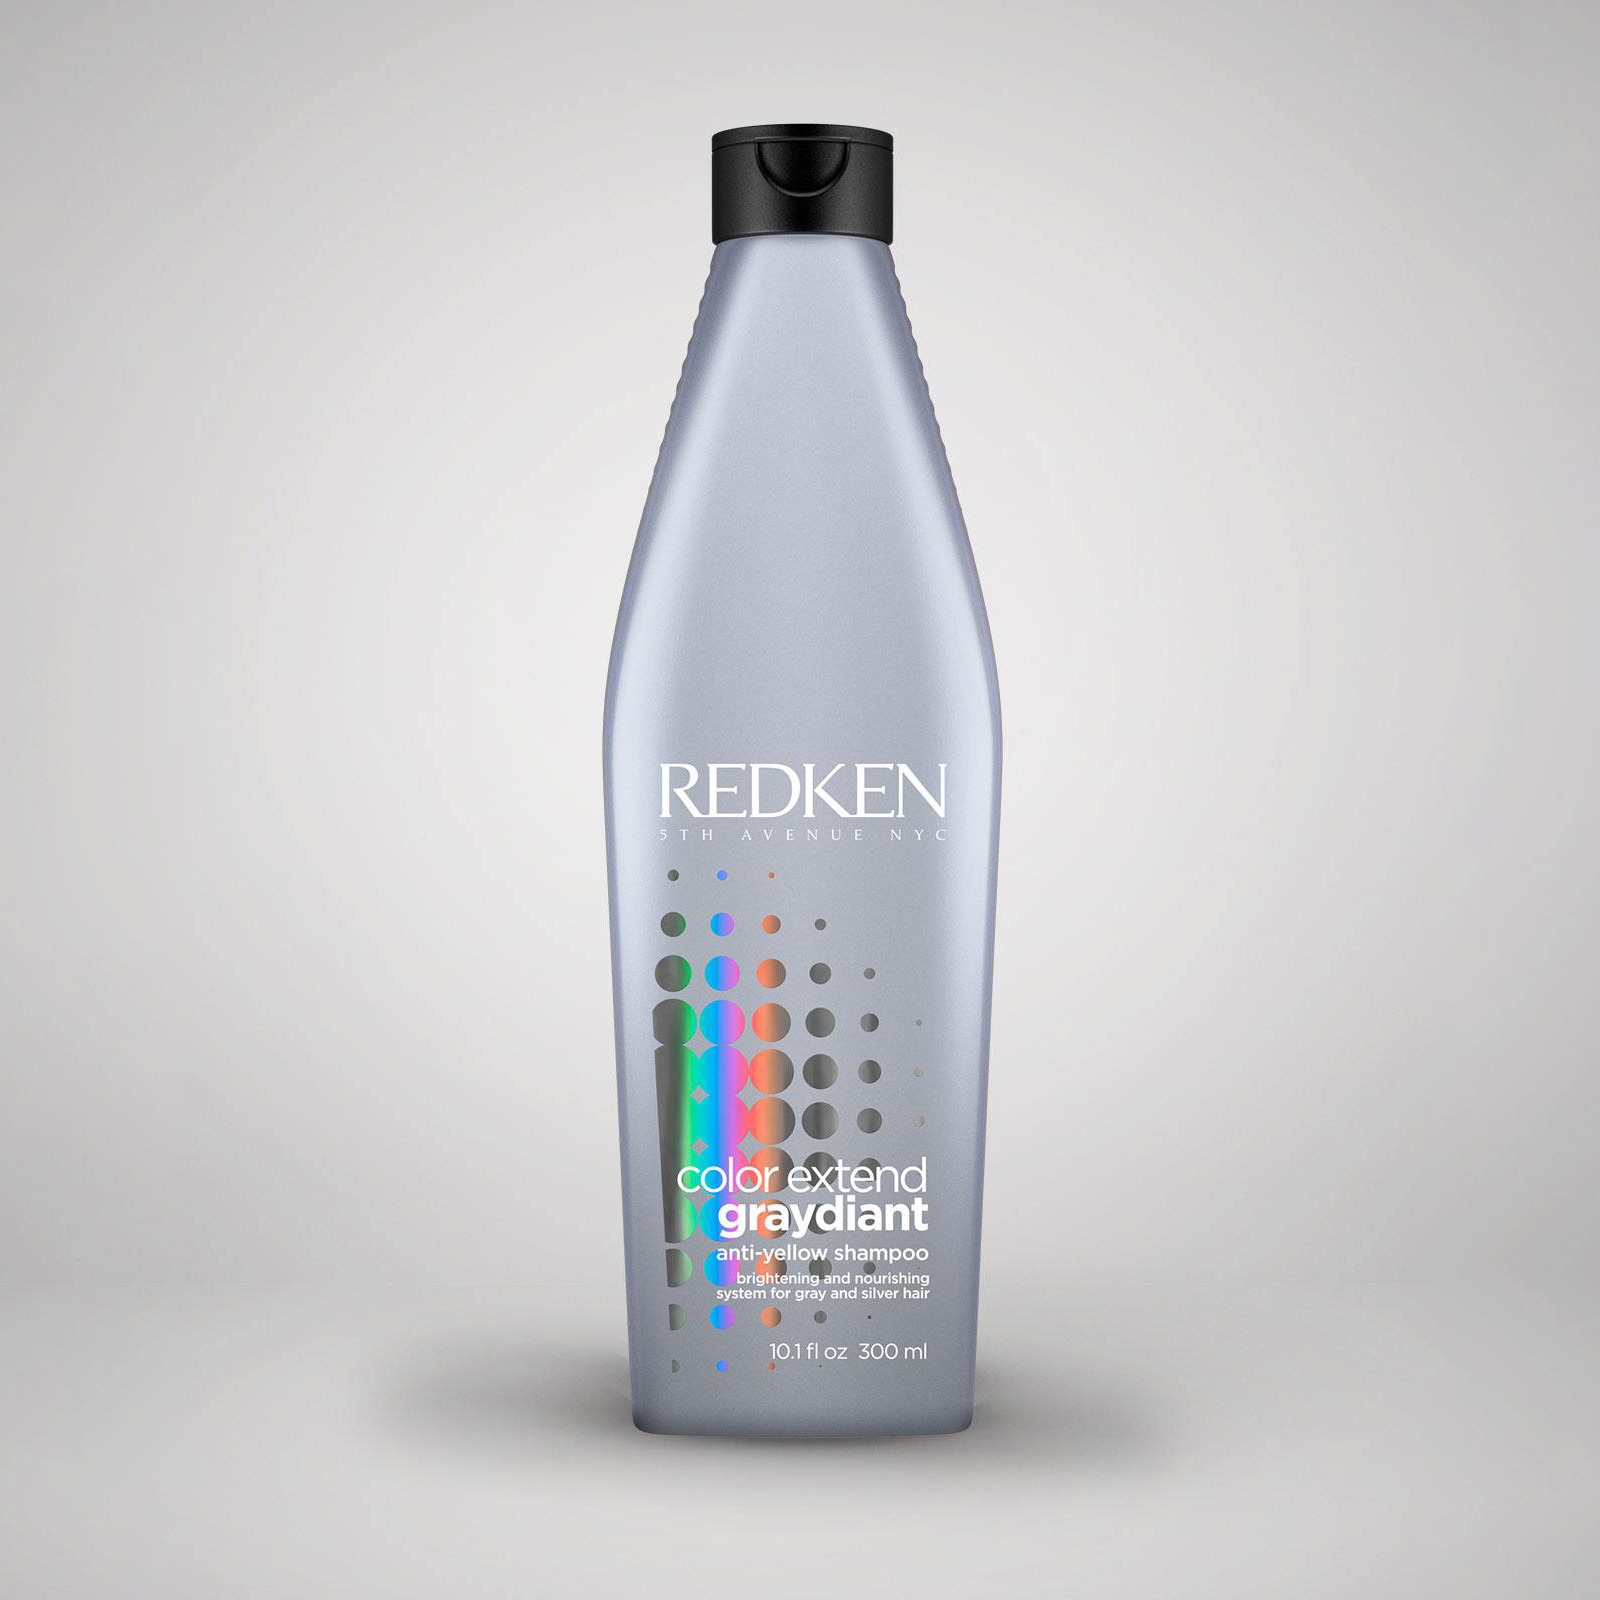 Redken Color Extend Graydiant Shampoo for Gray Hair